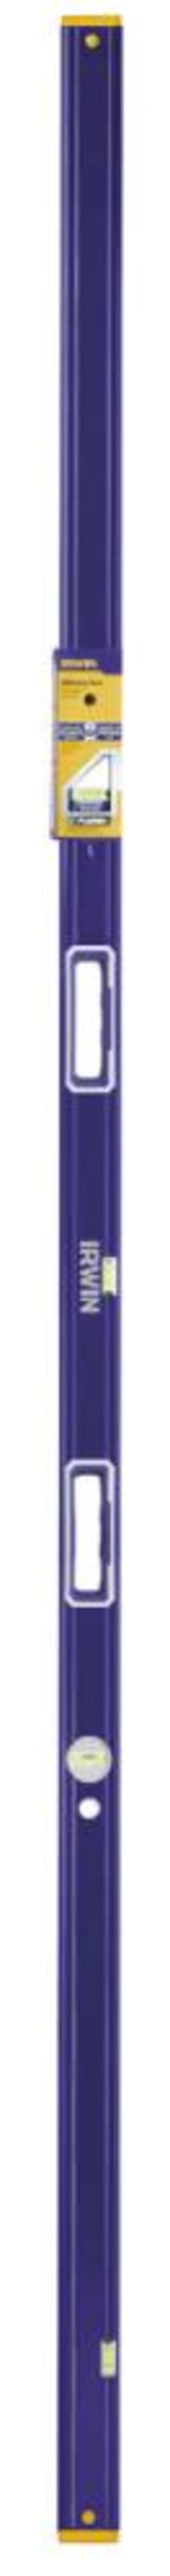 Irwin 96 In. 2500 Box Beam Level, large image number 0